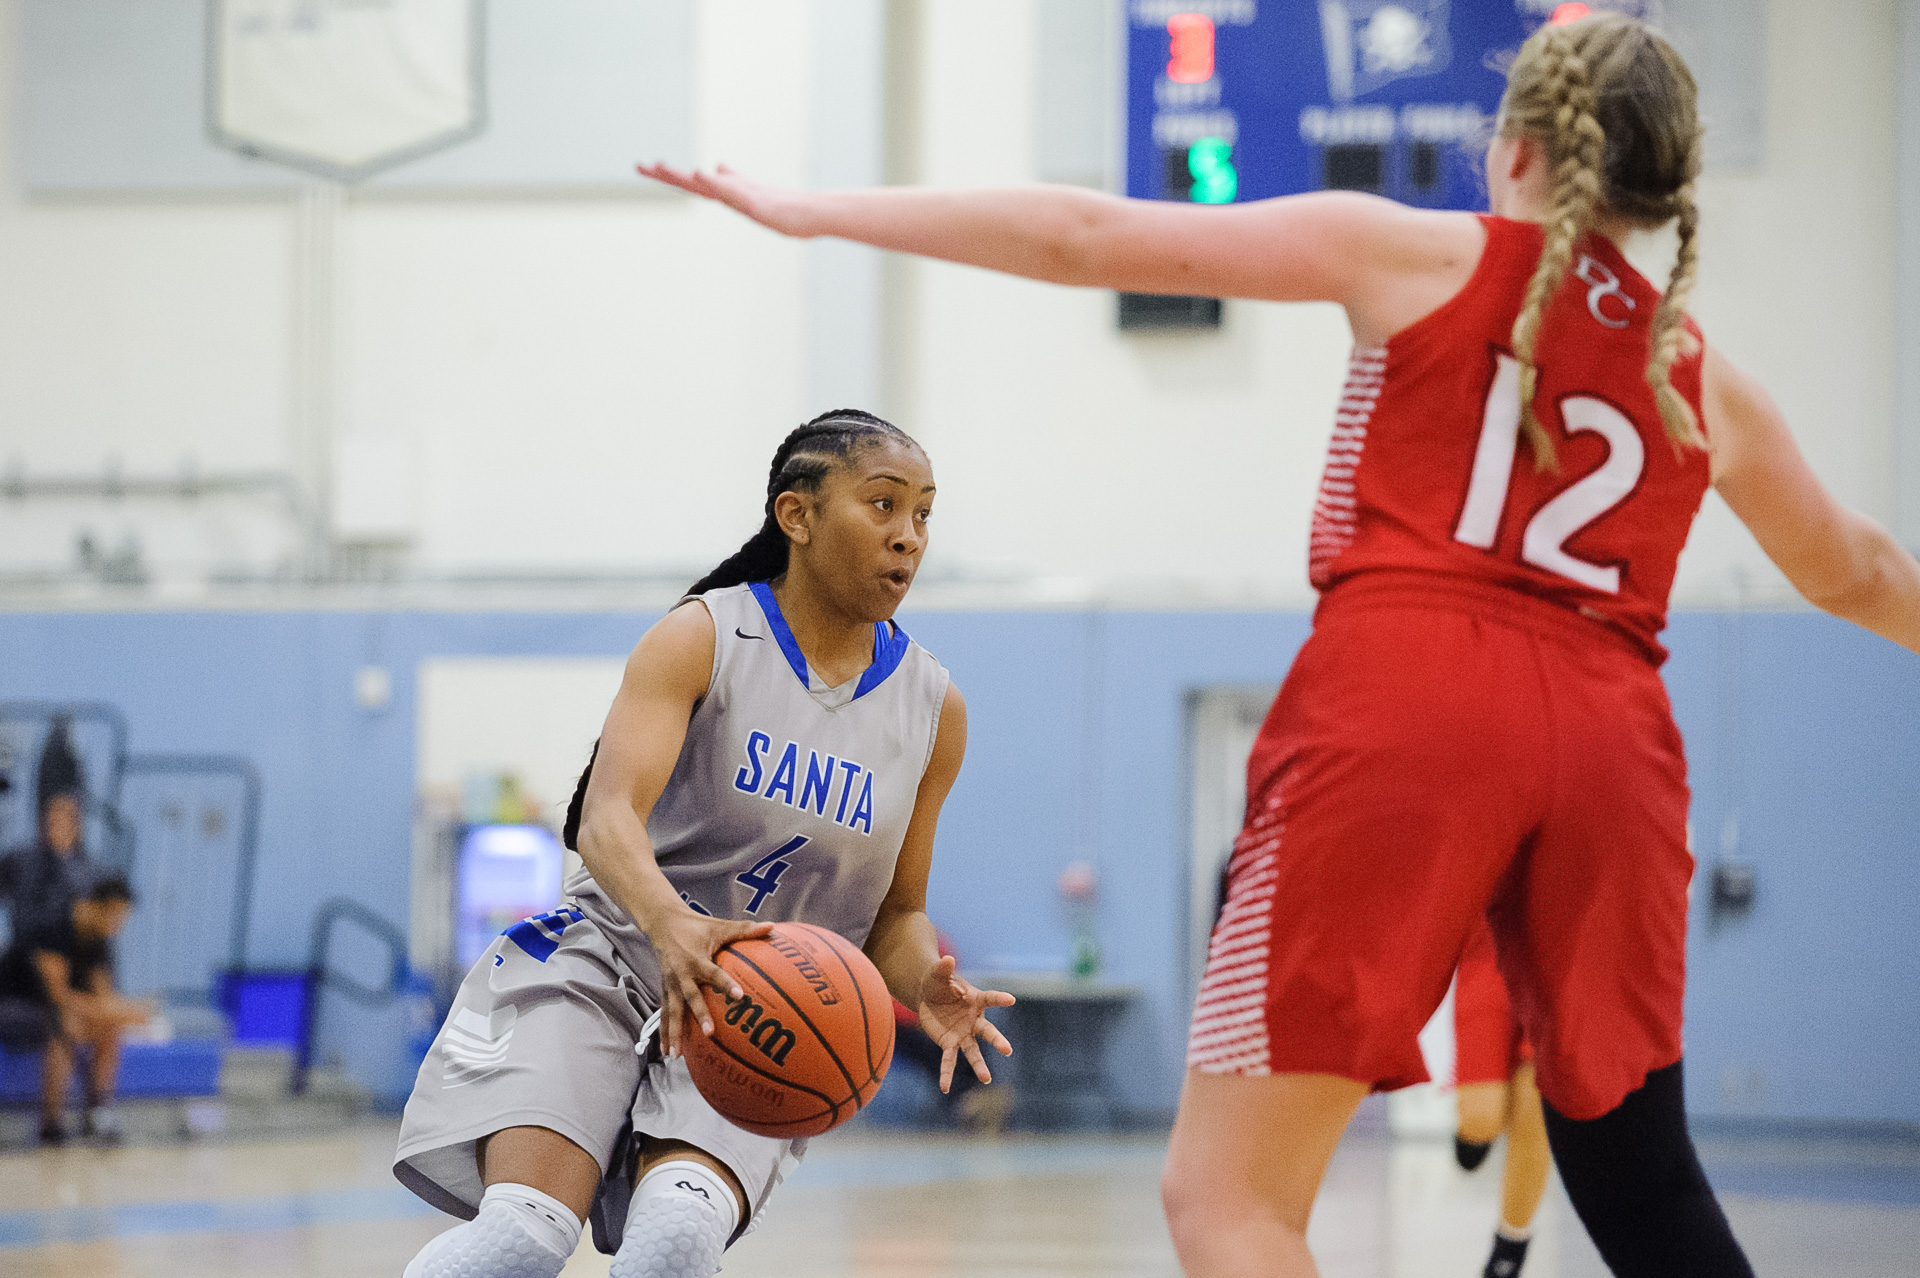  Guard Lisa Hall (4,Left) of Santa Monica College prepares to make a pass while being guarded by Angie Kroeger (12,Right) of Bakersfield College. The Santa Monica College Corsairs lose the game 62-72 to the Bakersfield College Renegades. The game was